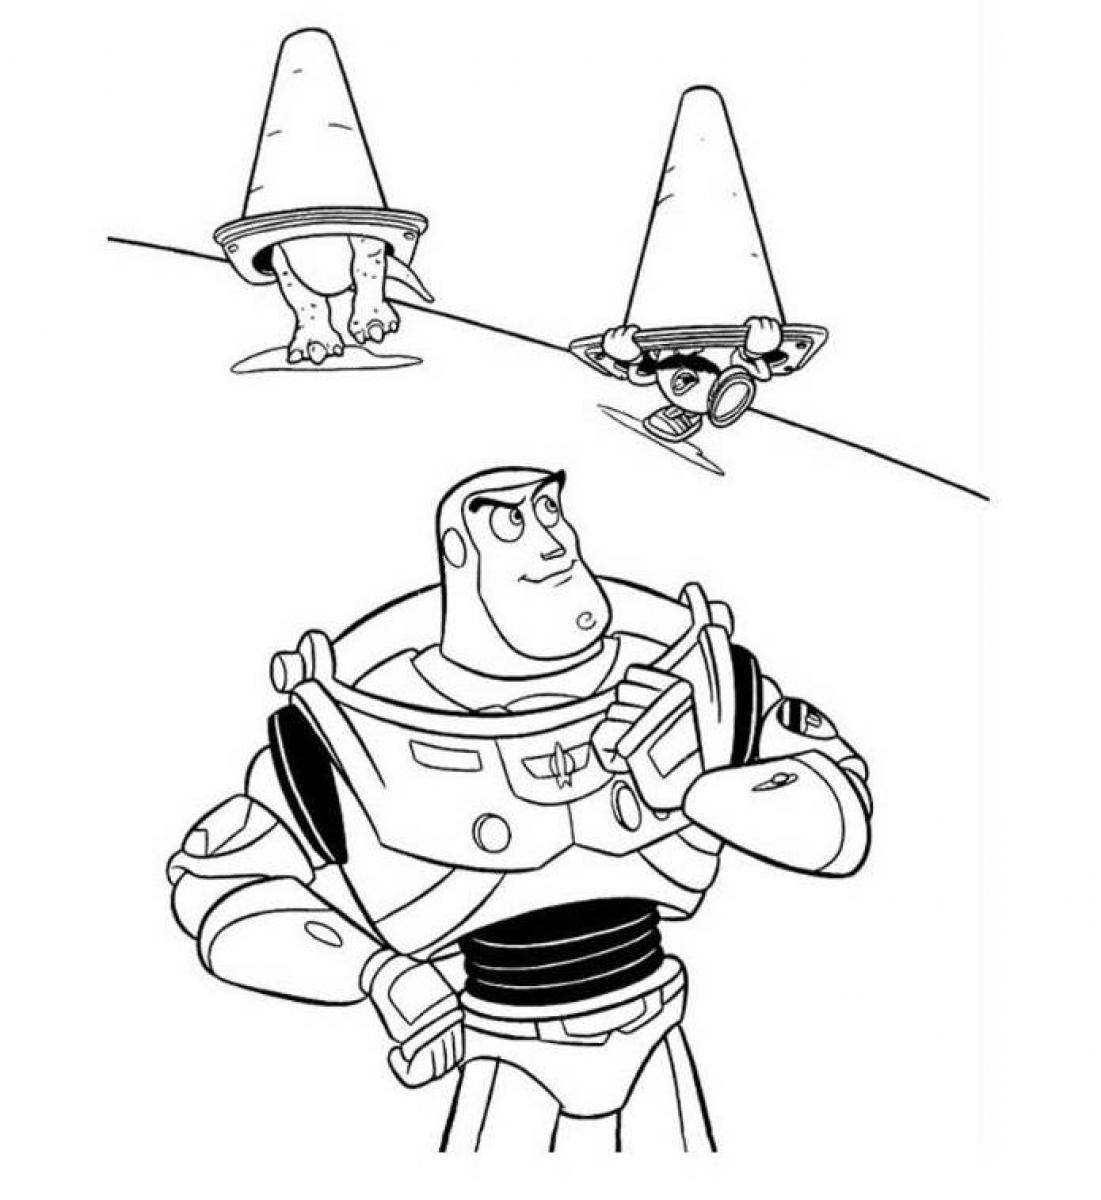 Free Printable Buzz Lightyear Coloring Pages For Kids